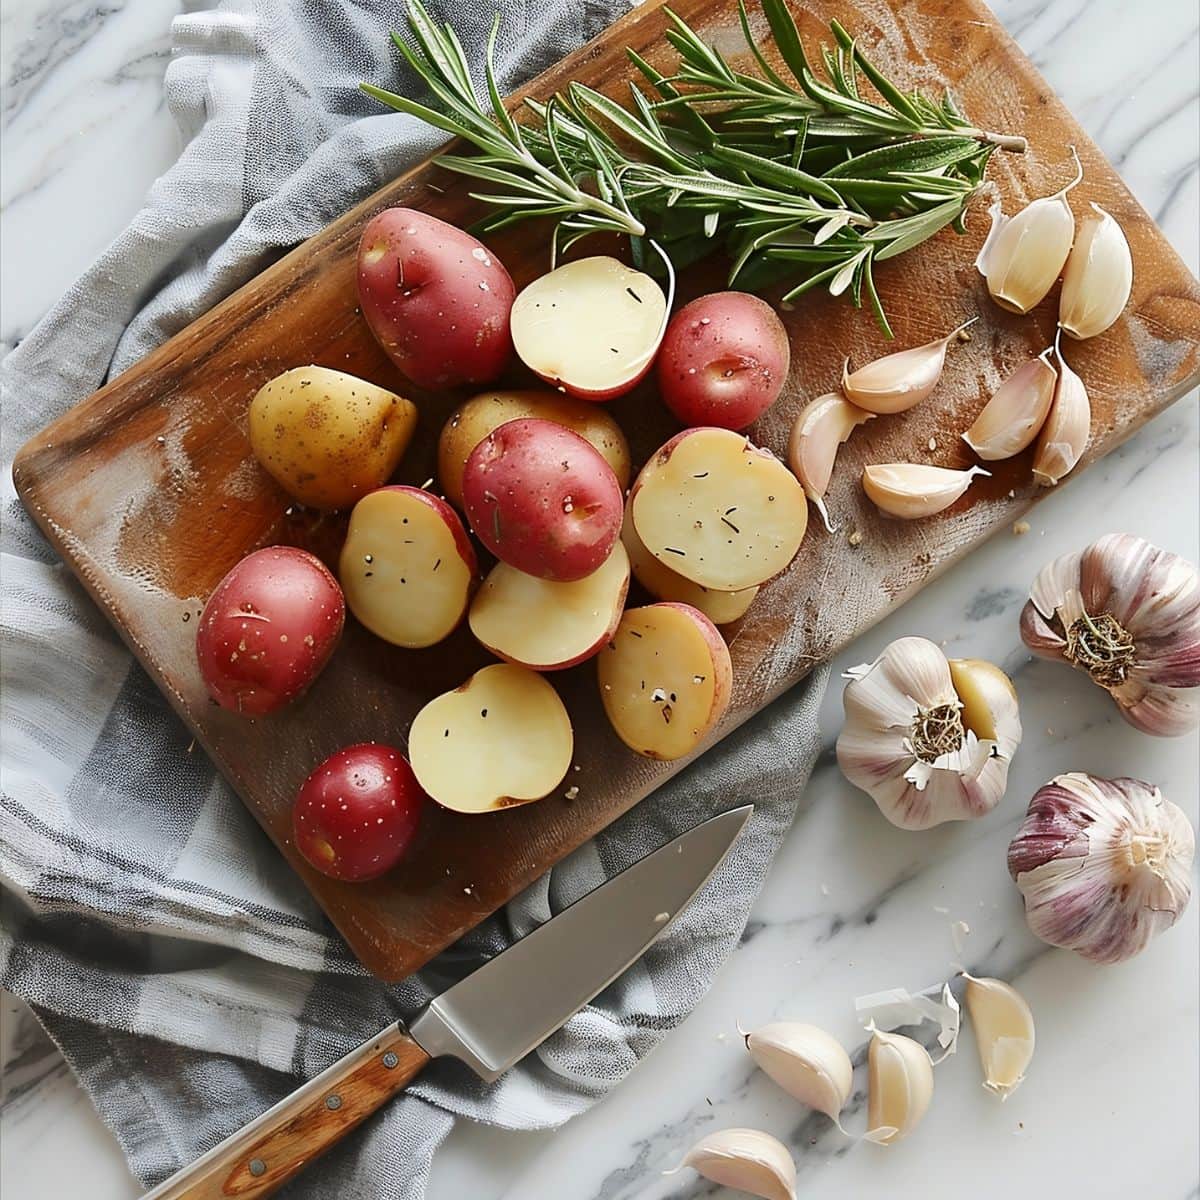 Potatoes on a Wooden Cutting Board with Garlic and Rosemary on a White Marble Table